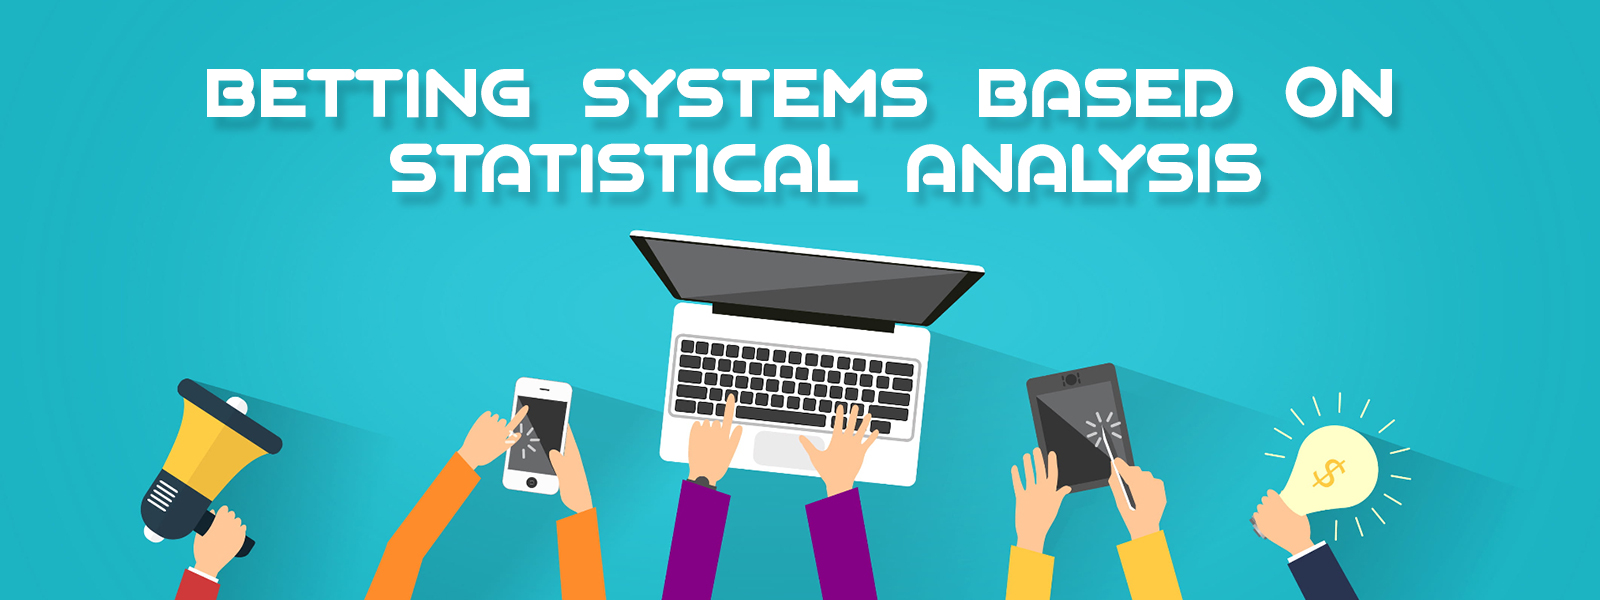 SoccerTipsters Blog | Betting Systems Based On Statistical Analysis